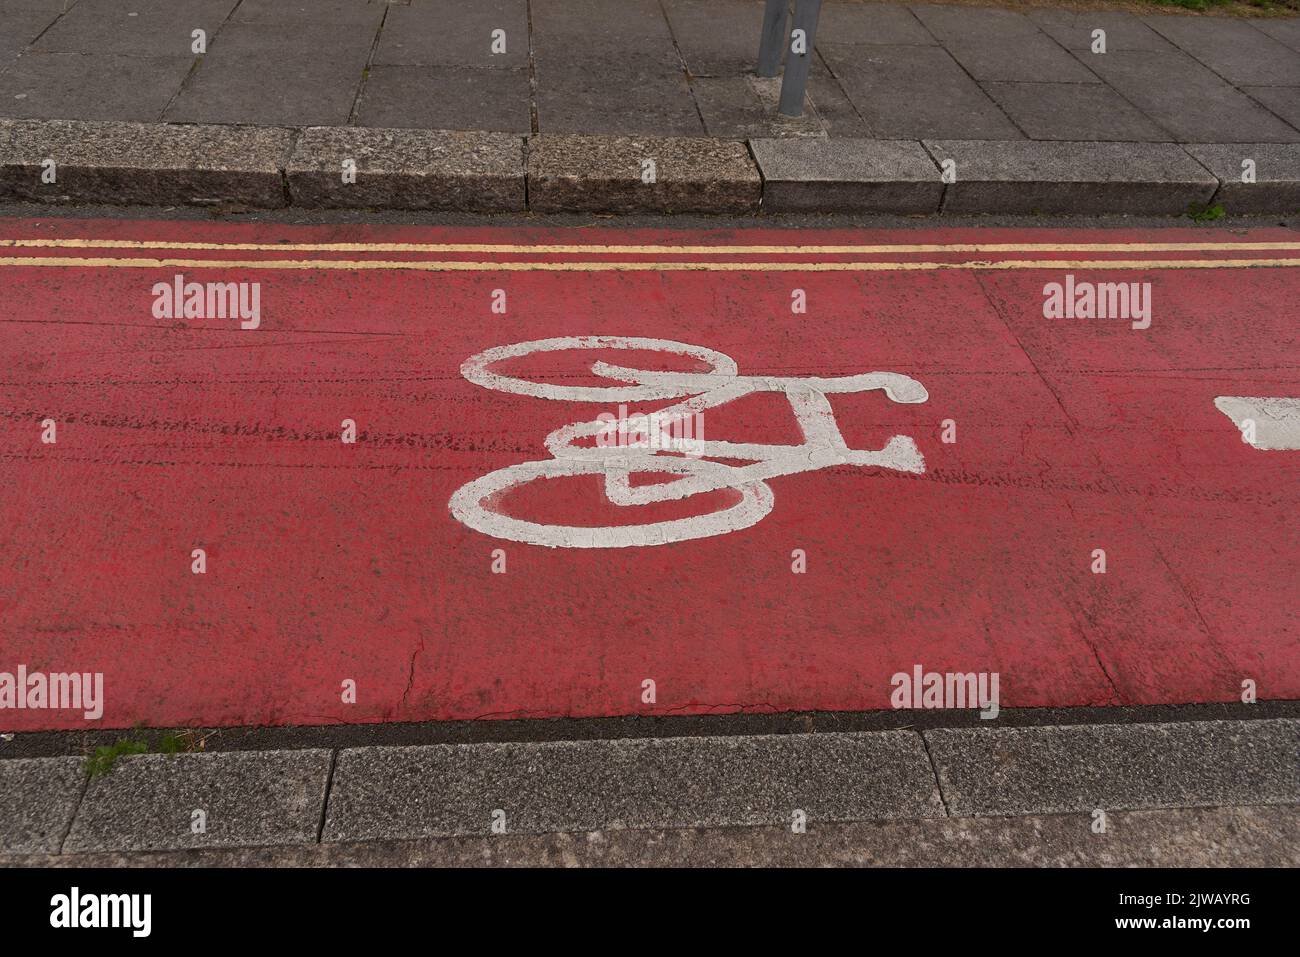 Plymouth, Devon, England, UK. 2022. White painted bicycle on red coloured road surface along a city road showing dropdown kerb  and double yellow line Stock Photo